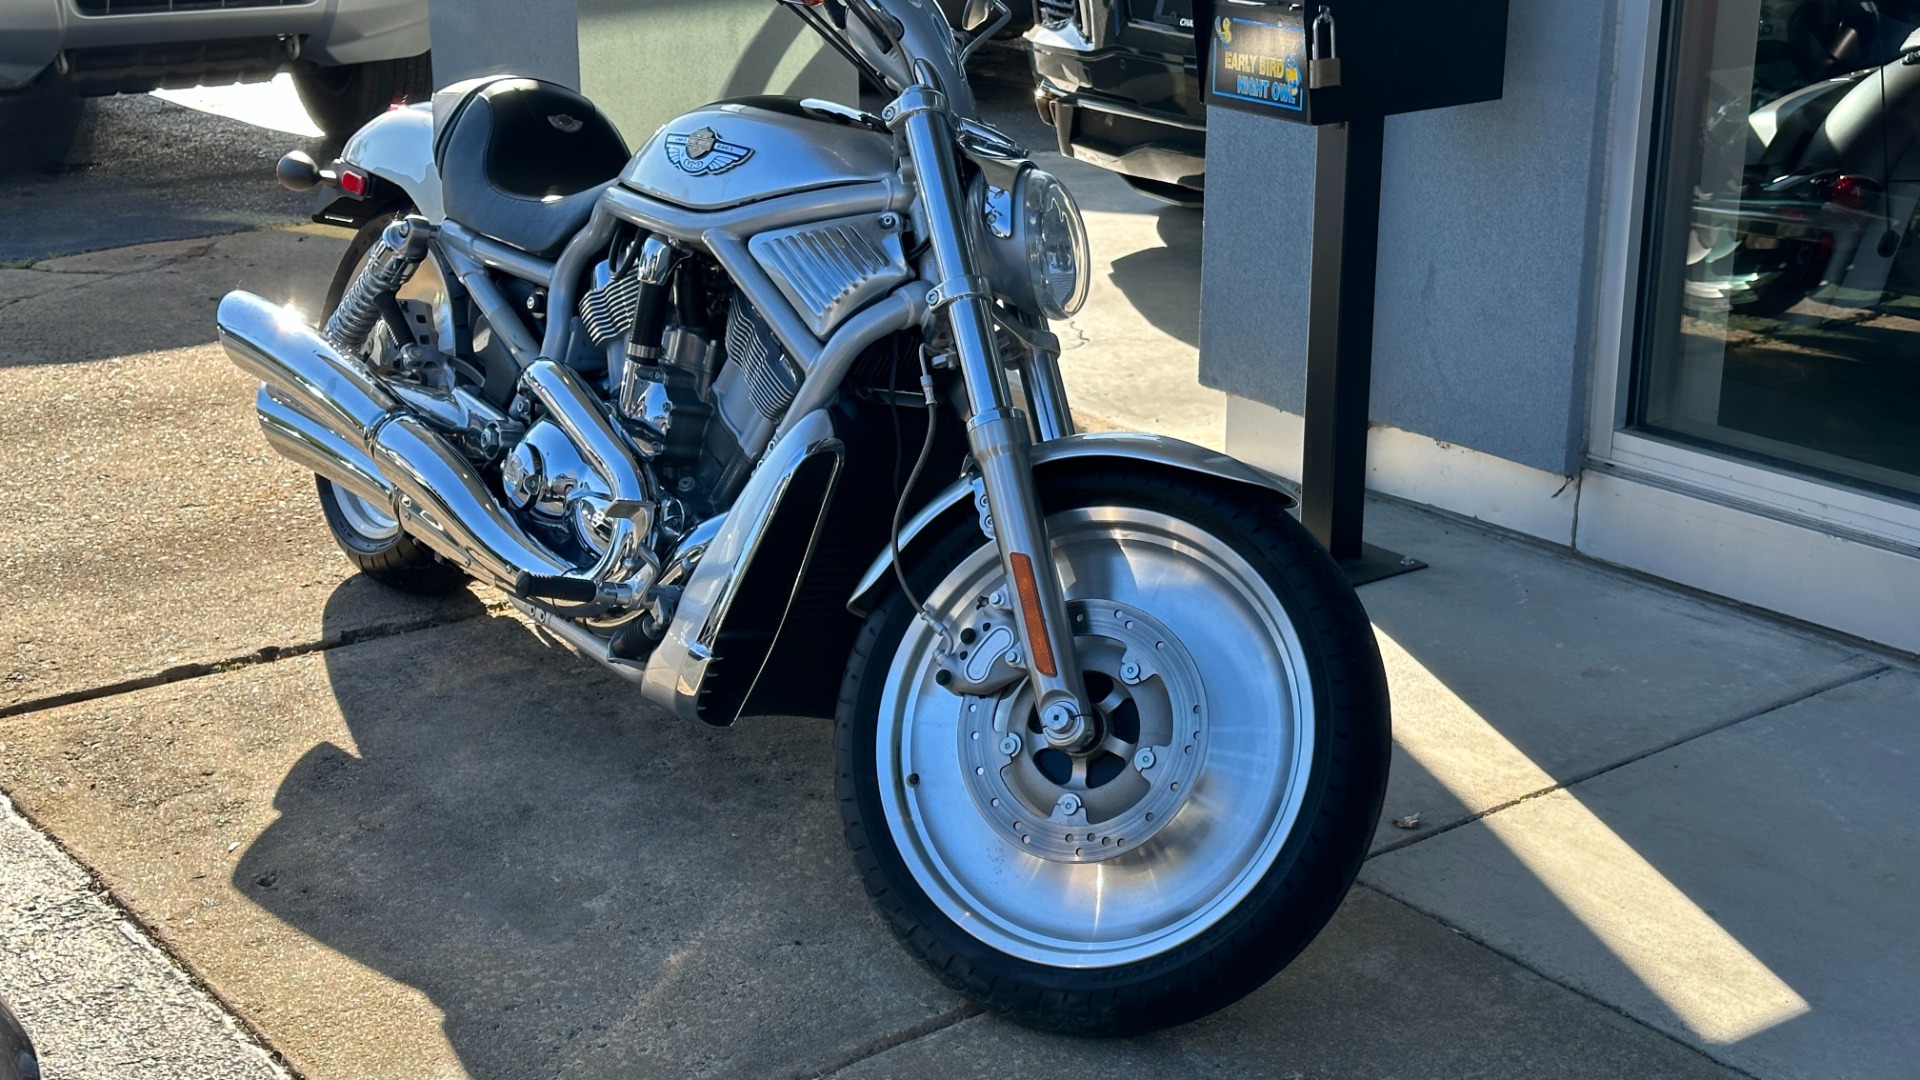 Used 2003 Harley Davidson V Rod ANNIVERSARY EDITION / 1130CC ENGINE / BREMBO BRAKES / VORTEX AIR SCOOPS for sale $7,695 at Formula Imports in Charlotte NC 28227 63